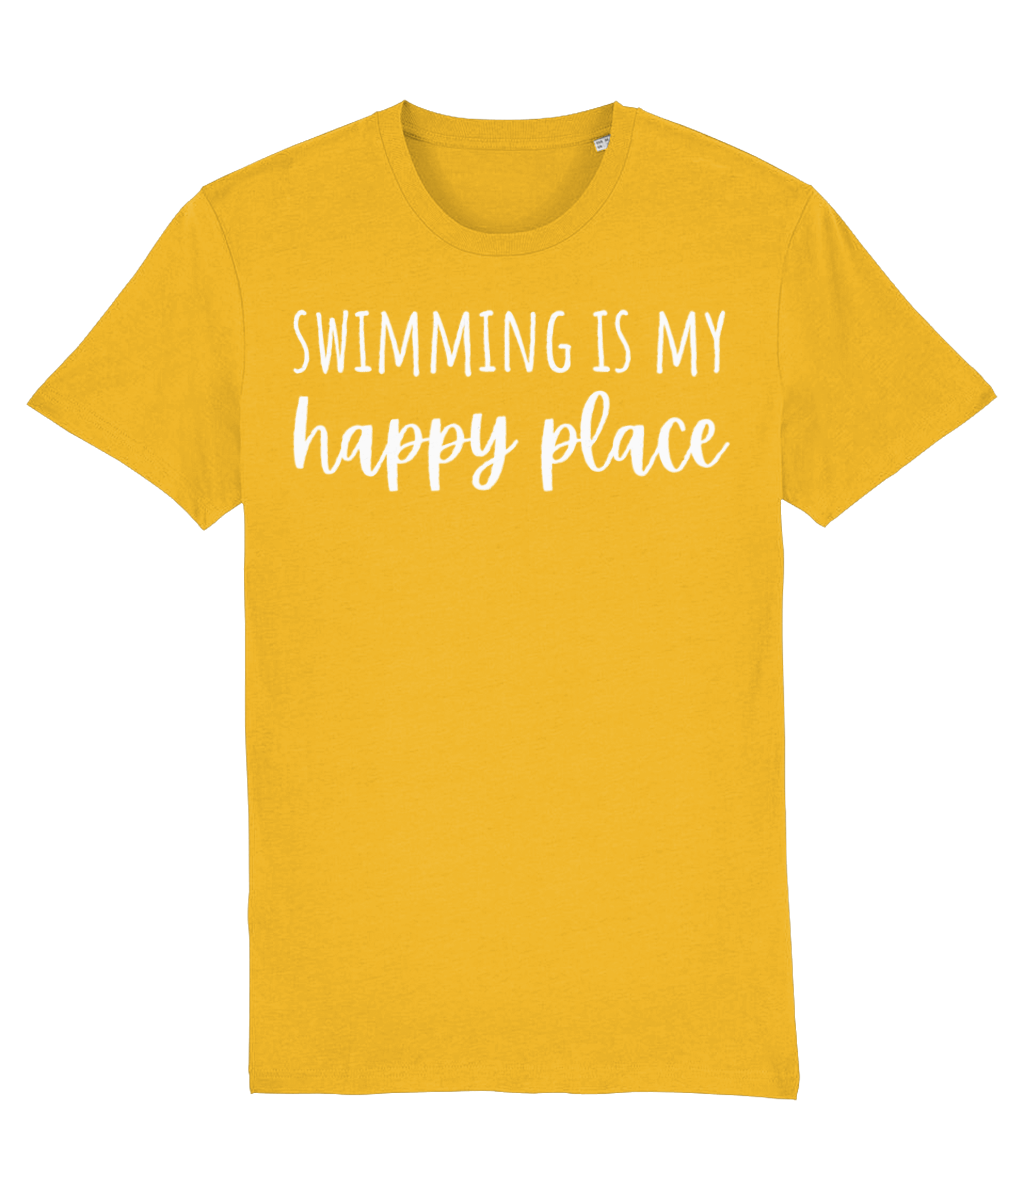 Swimming Is My Happy Place Unisex Organic Cotton T-shirt